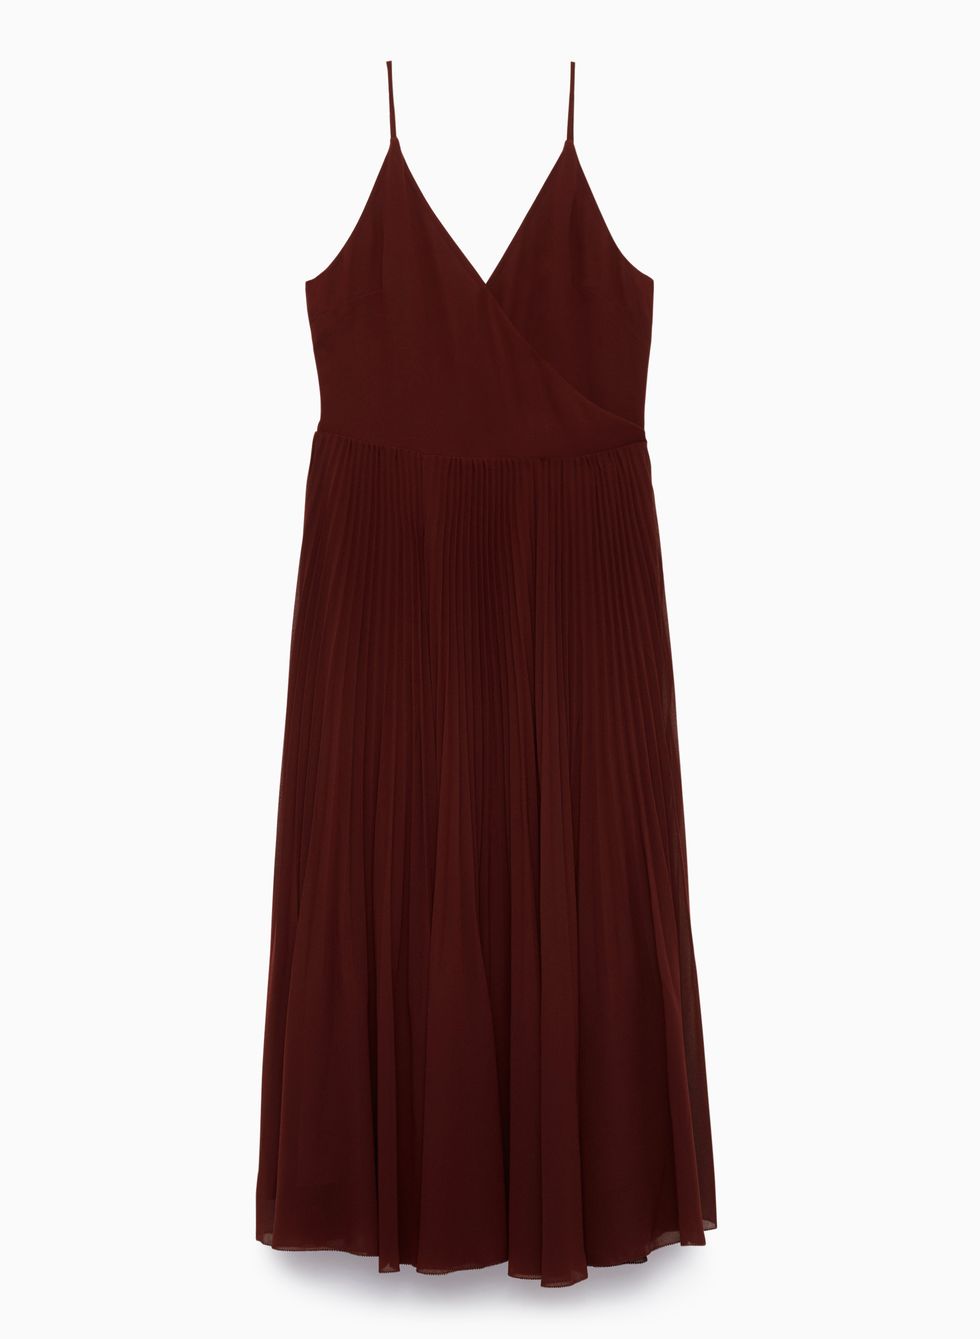 Clothing, Dress, Maroon, Day dress, Cocktail dress, Neck, A-line, Sleeveless shirt, Gown, Sleeve, 